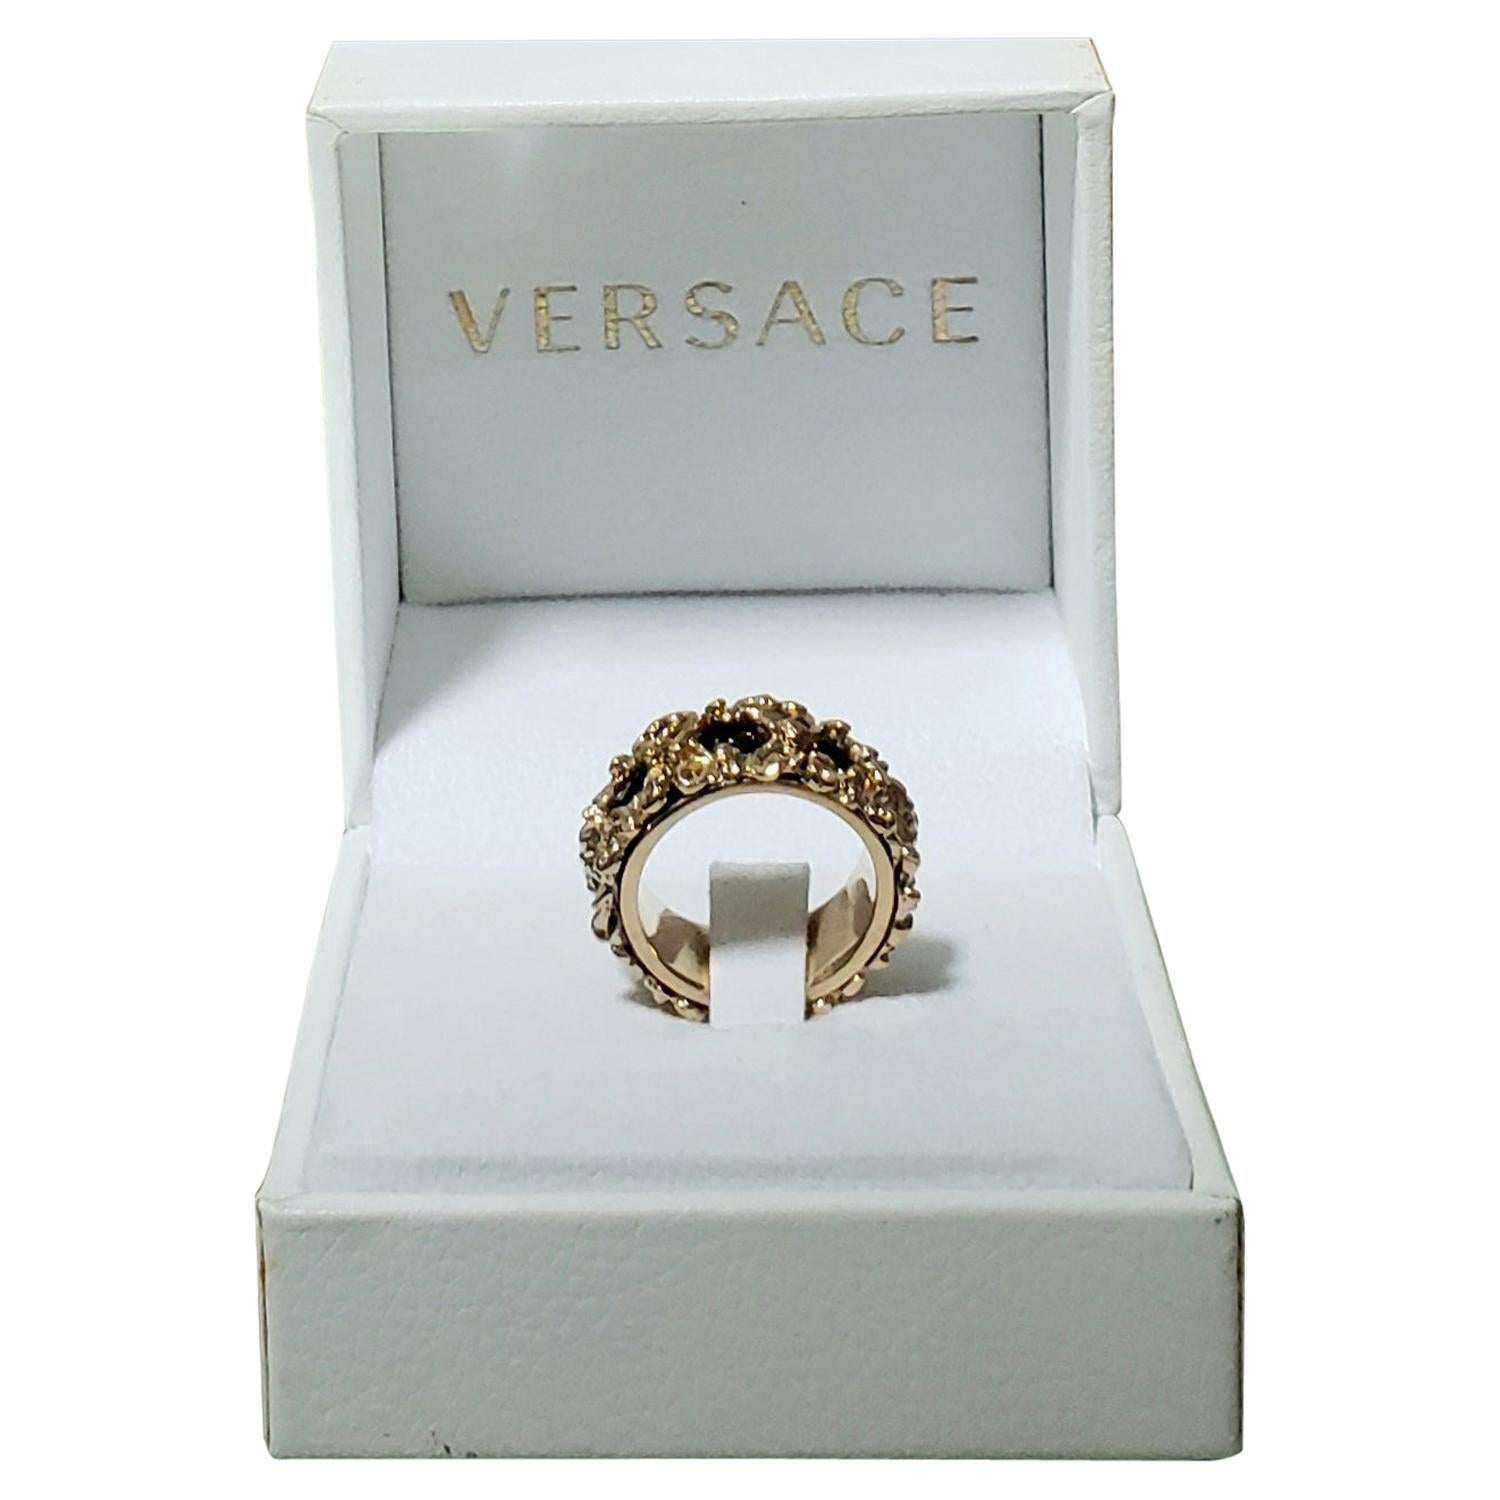 NEW VERSACE ALL OVER CRYSTAL GOLD PLATED MEDUSA RING Size 7; 7.5 